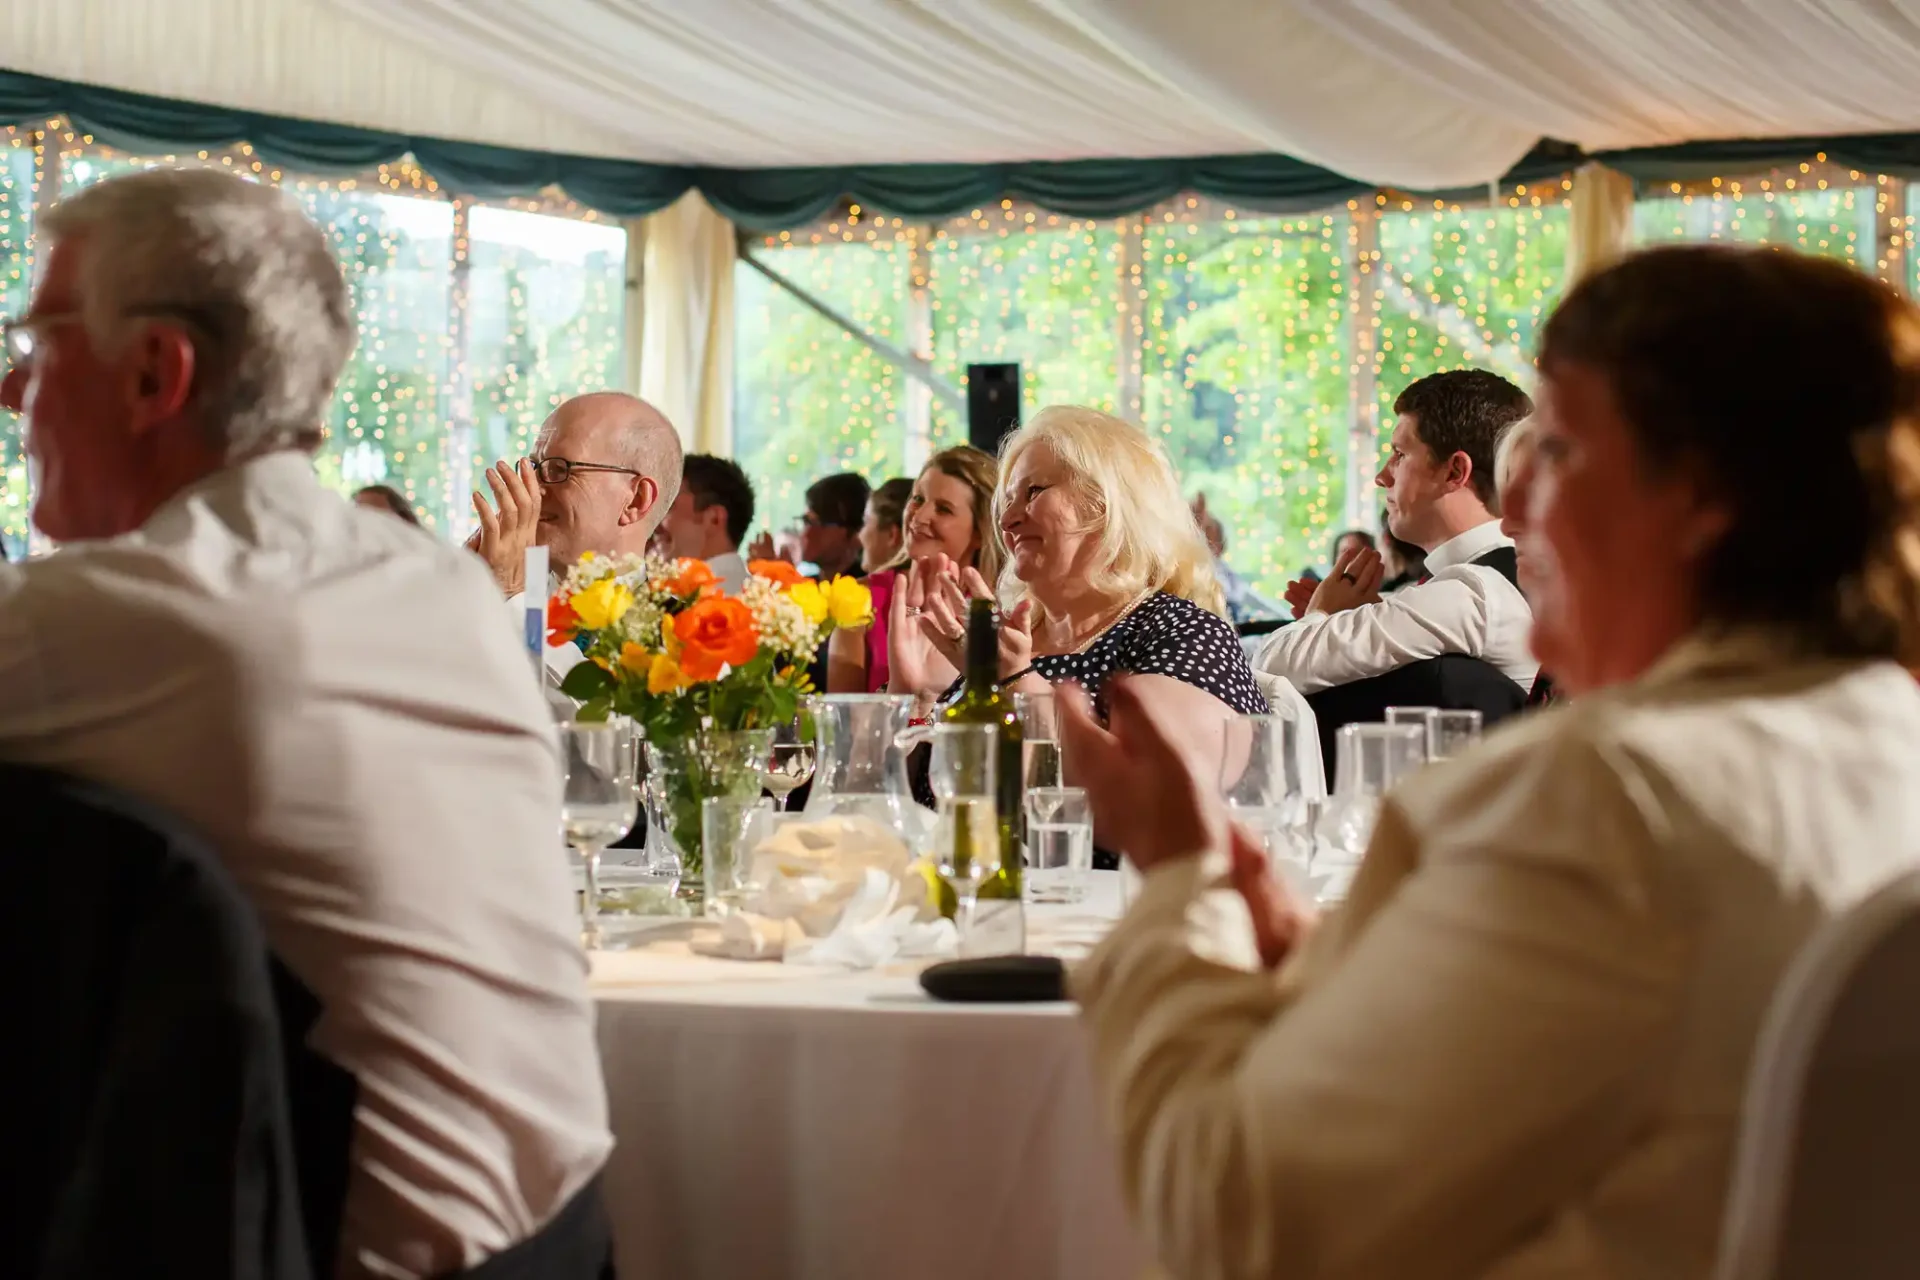 Guests seated at tables in an elegant tent adorned with fairy lights, applauding during a festive event.